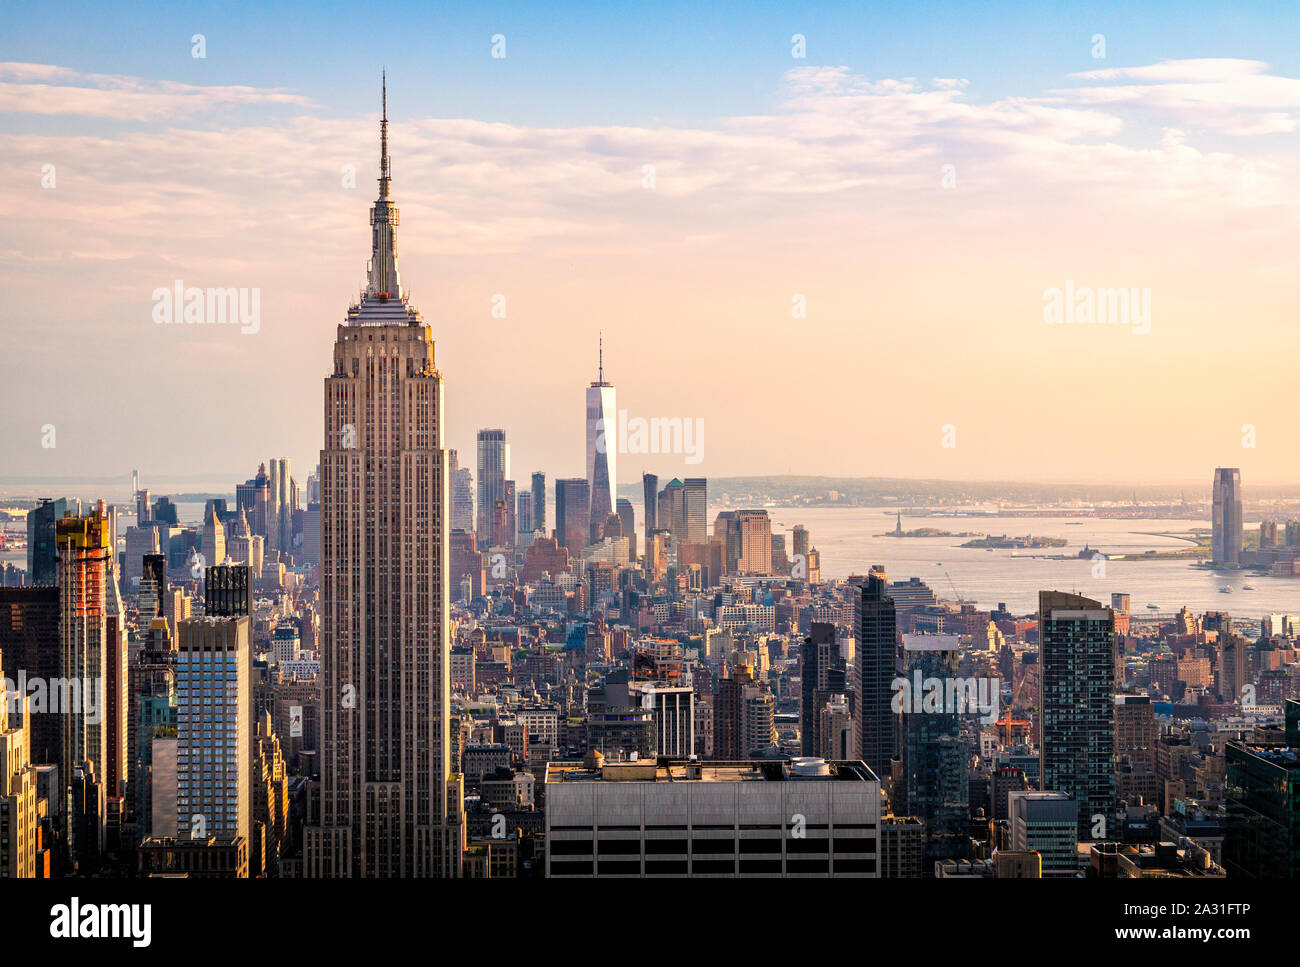 The Empire State Building towers over Manhattan in New York City, USA. Stock Photo